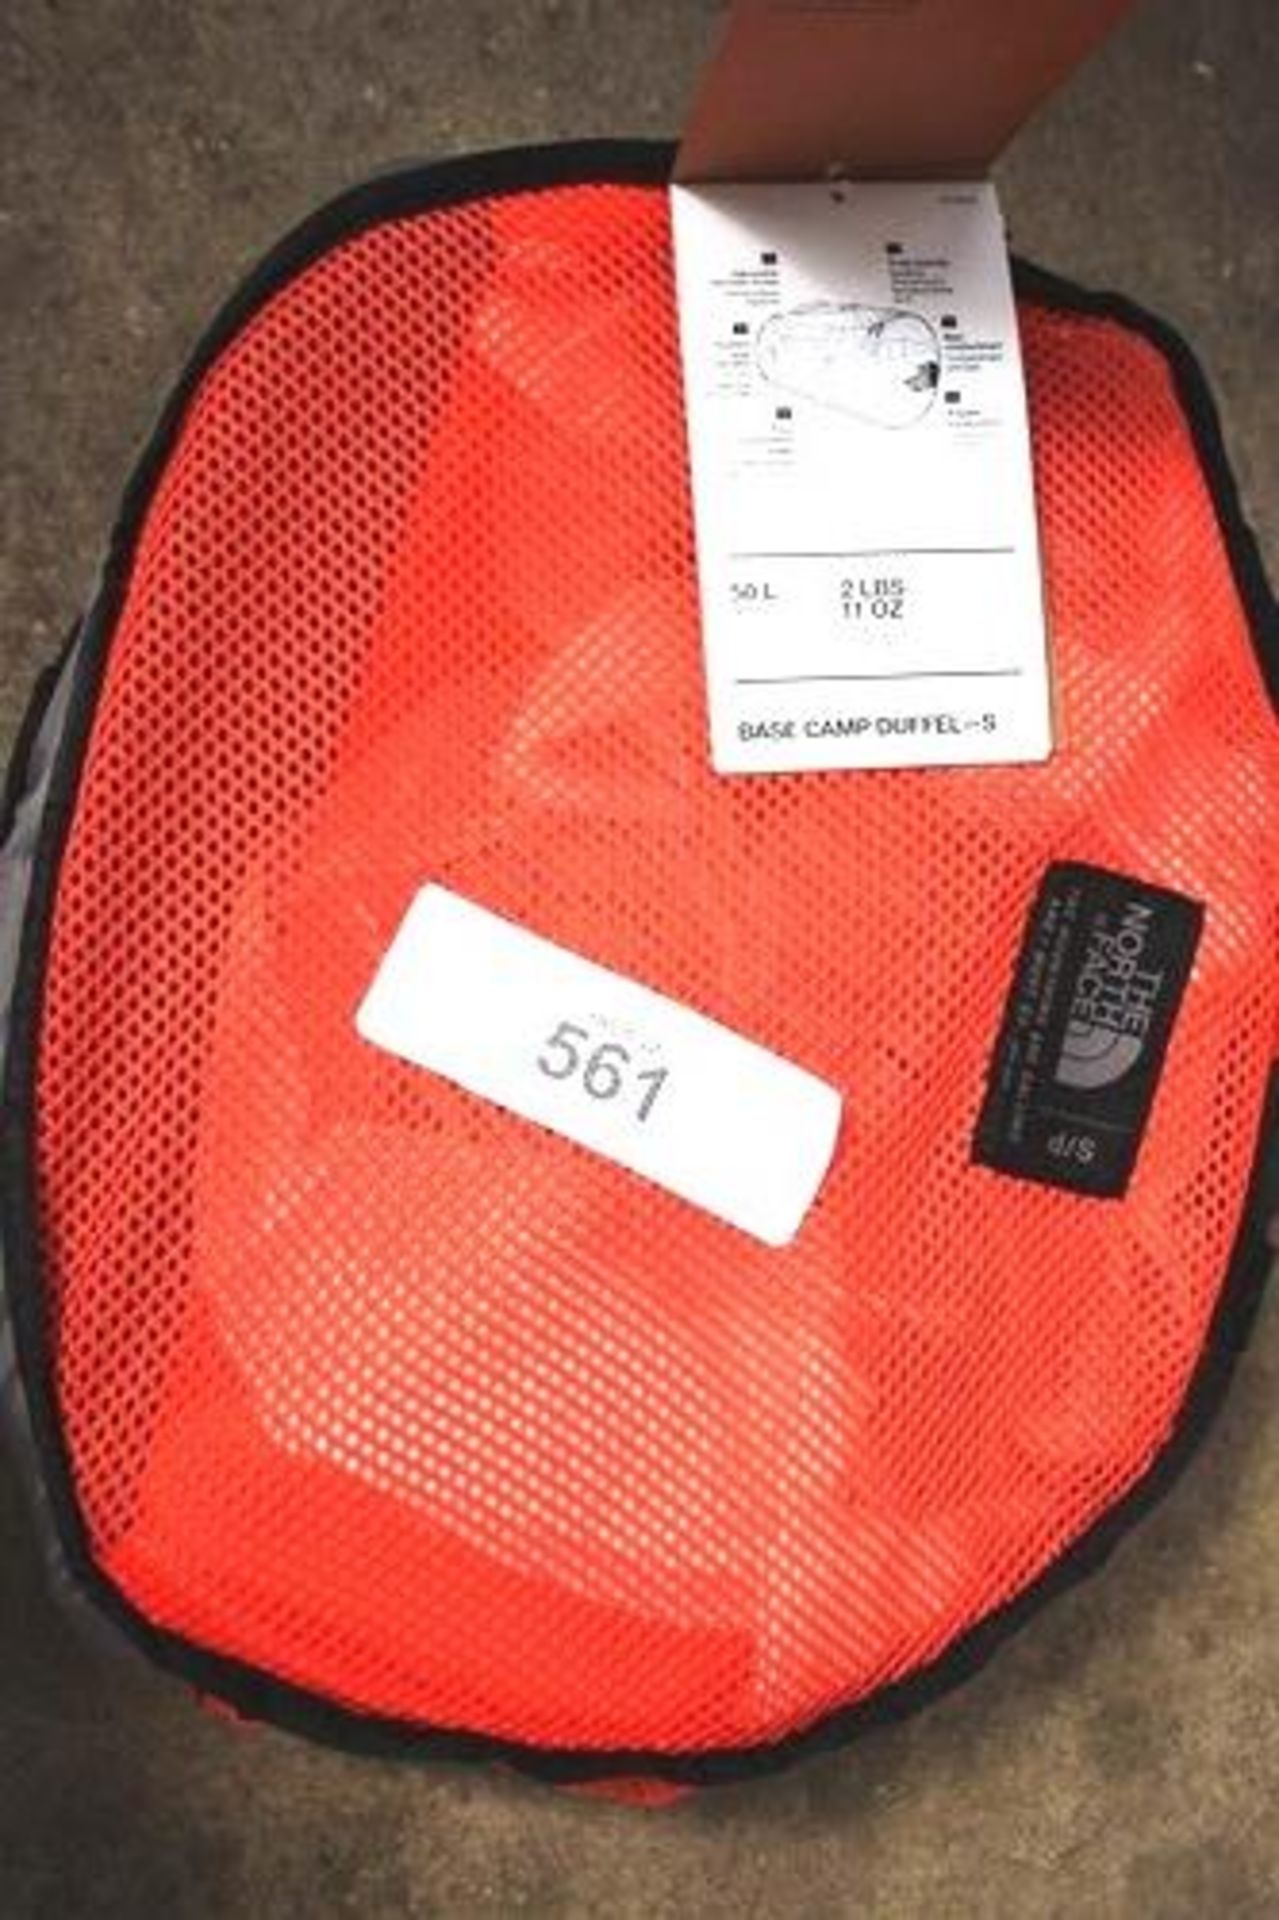 1 x The North Face Base Camp Duffel, size S, colour Flare/TNF/black - New with tags (GS20)